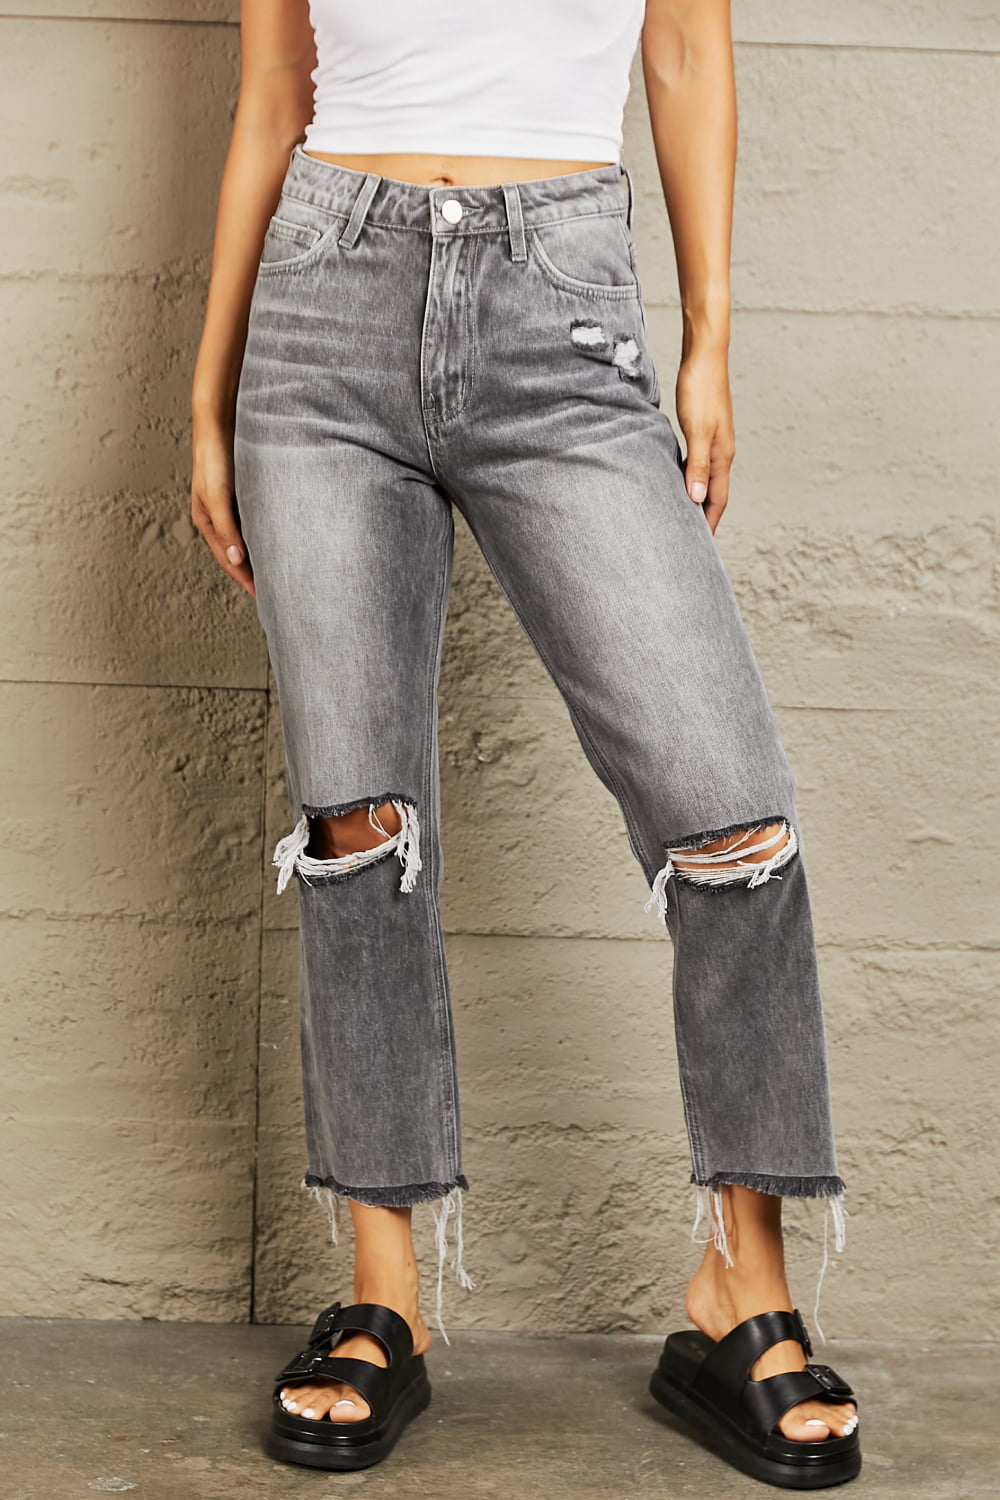 BAYEAS Stone Wash Distressed Cropped Straight Jeans - Alonna's Legging Land